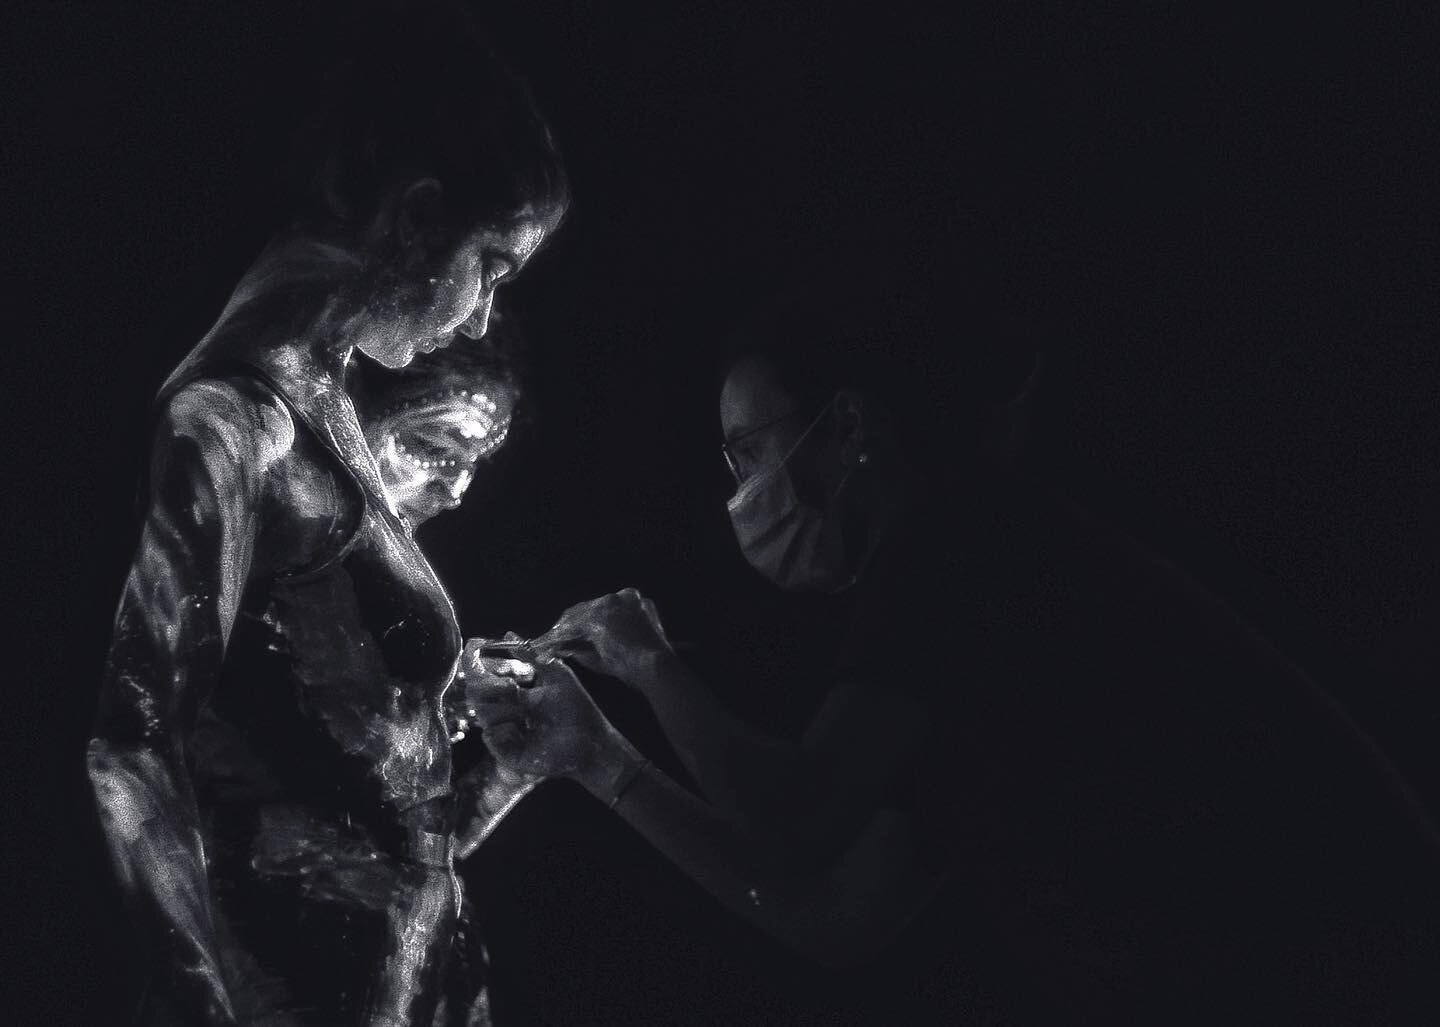 @natalia.hussein touches up @elodelicious and @gemmosz 's UV Body paint between takes. 

Natalias design for the paint evolved from very detailed, intricate, neat paintwork to much more free and uncontrolled swathes of paint that, under UV Light, LUT